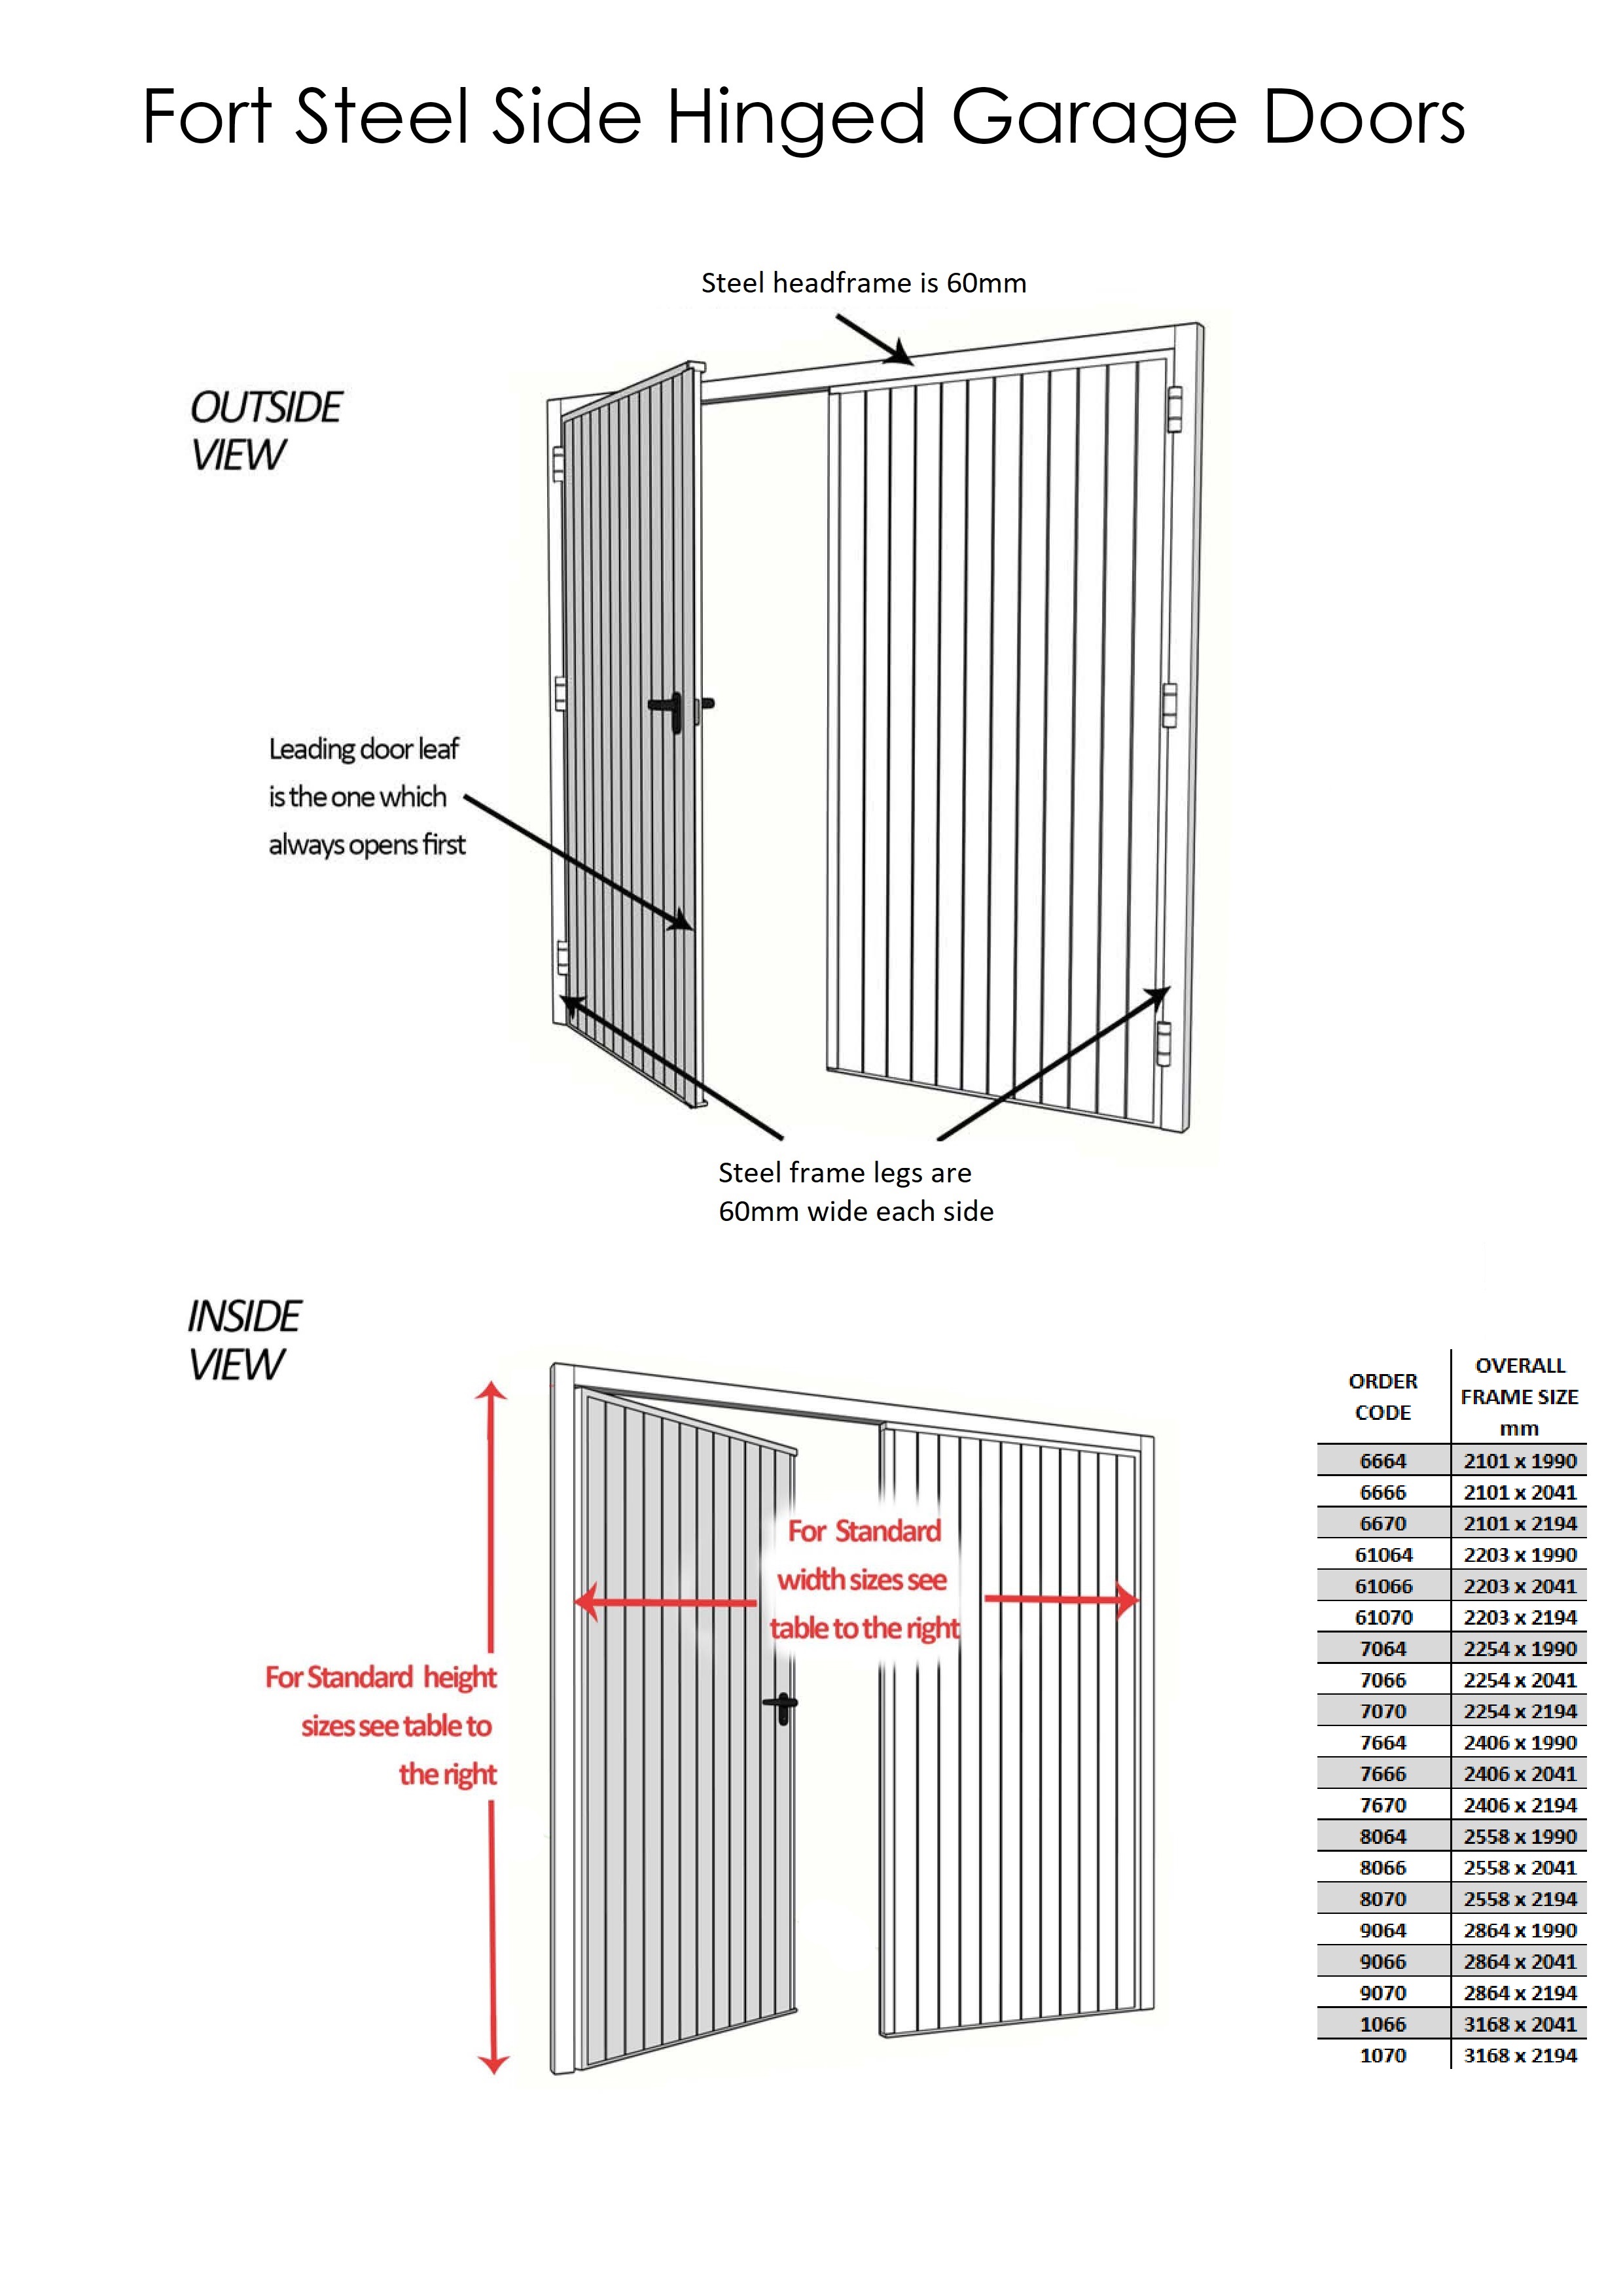 How to measure for Fort Side Hinged Garage Door